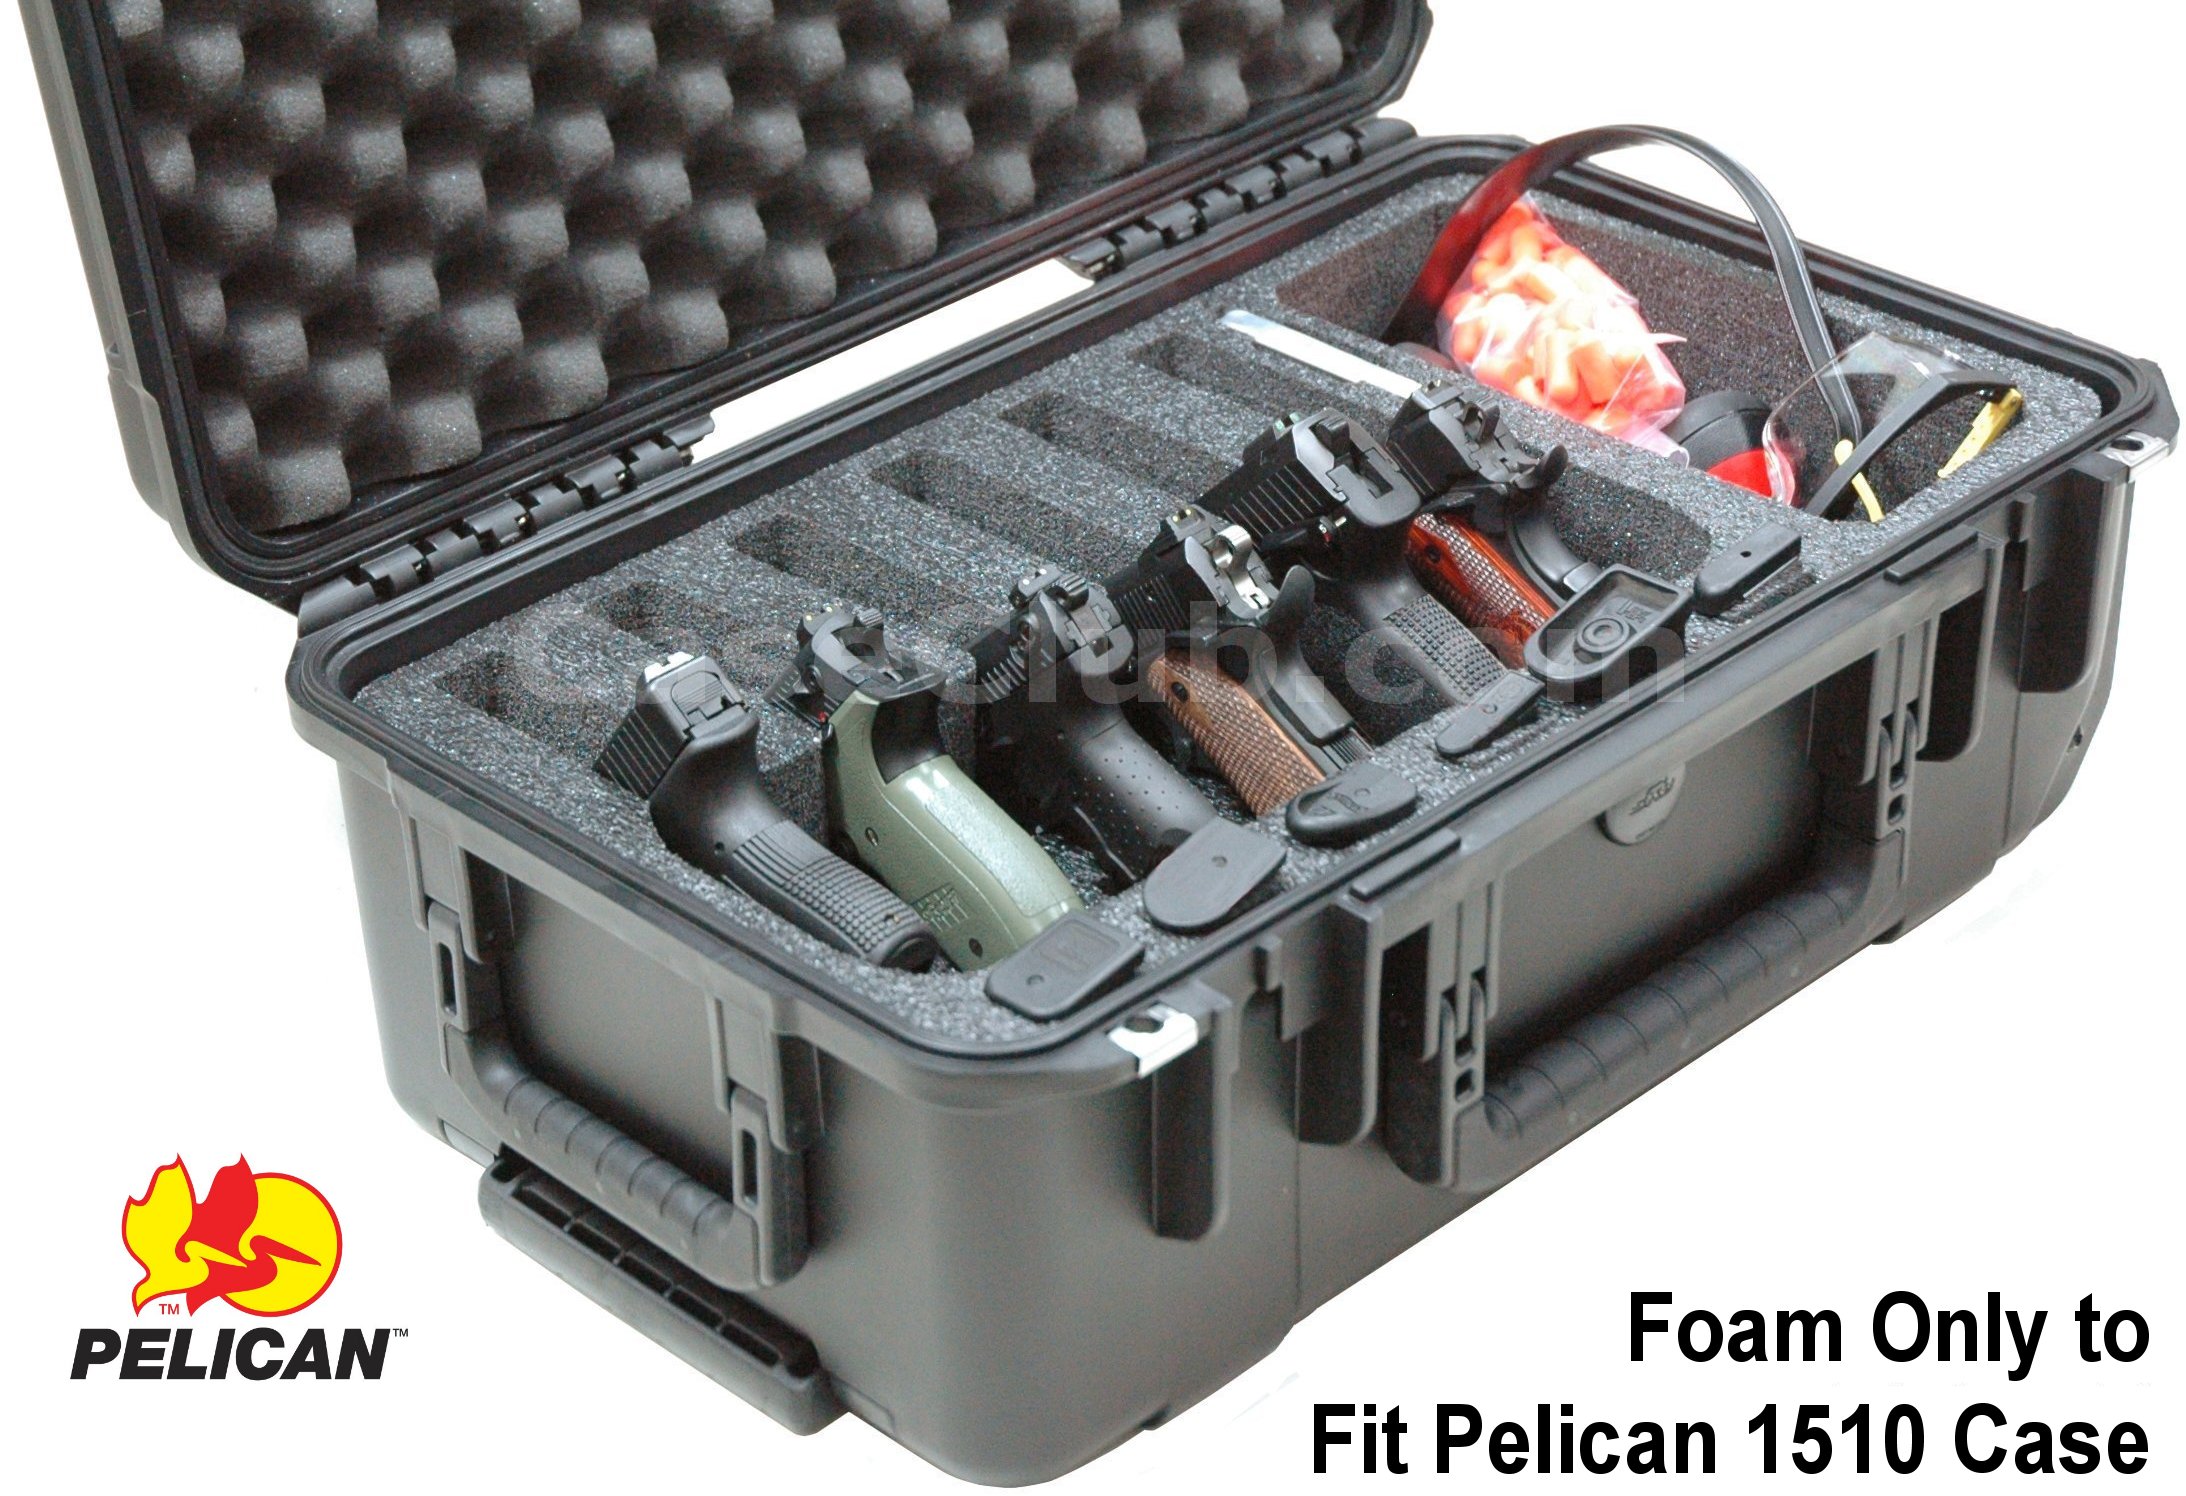 6 Pistol & Accessory Foam Only for the Pelican™ 1510 Case - Case Club